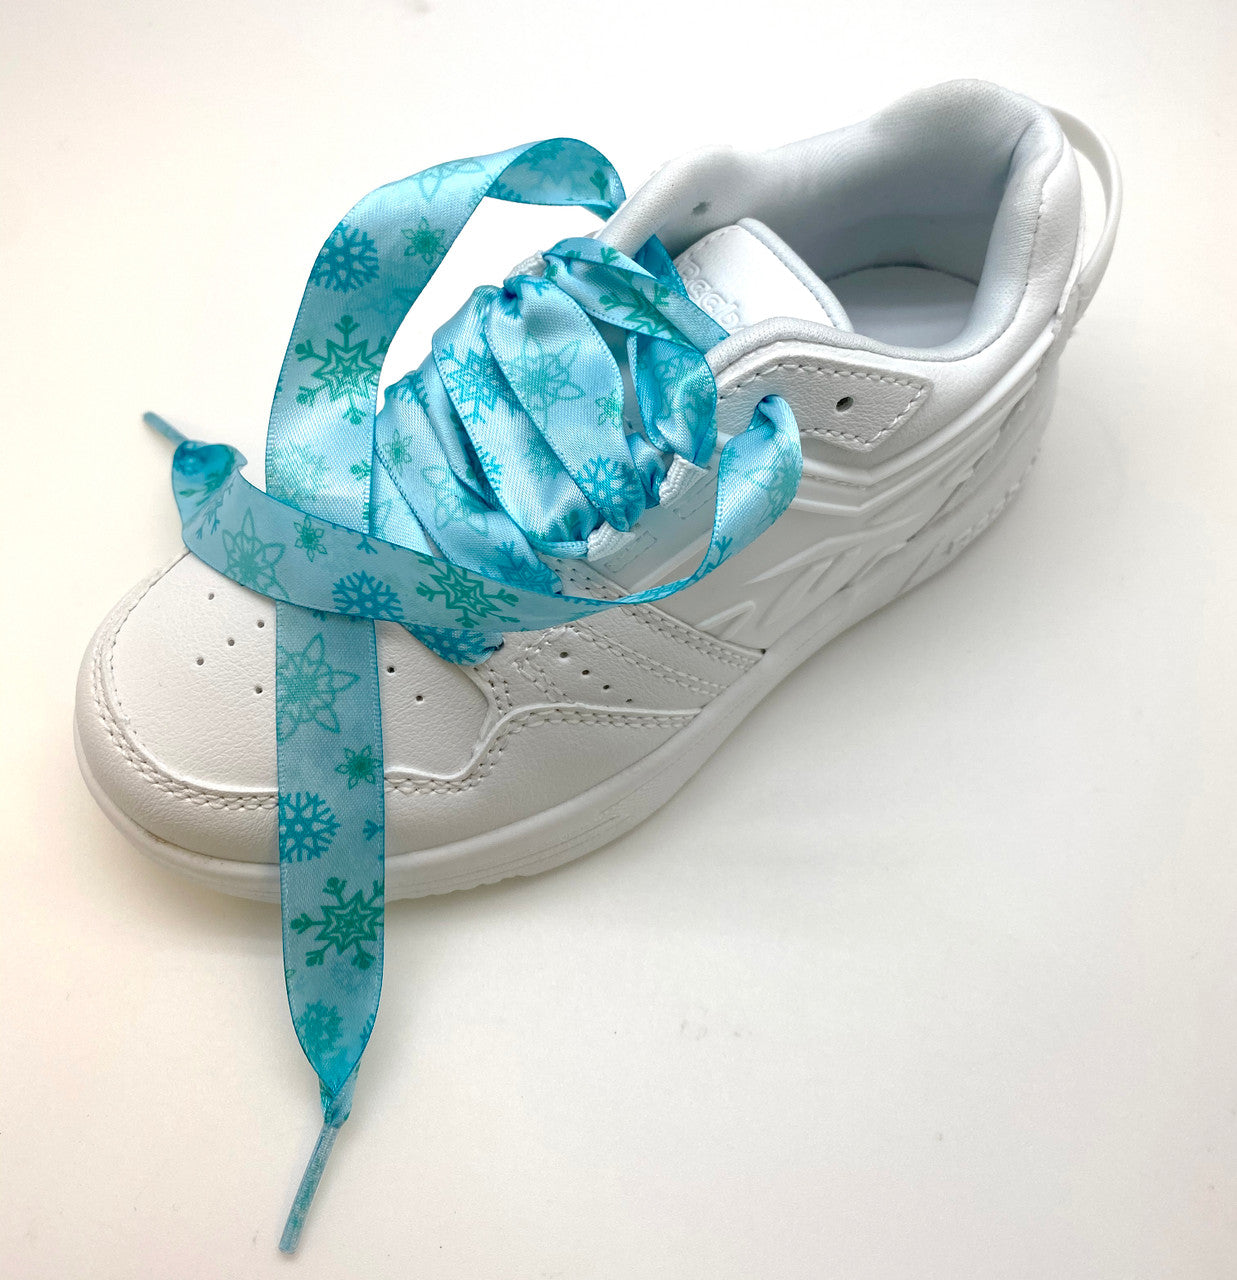 Fun fashion shoelaces will make you want to dance through your day!